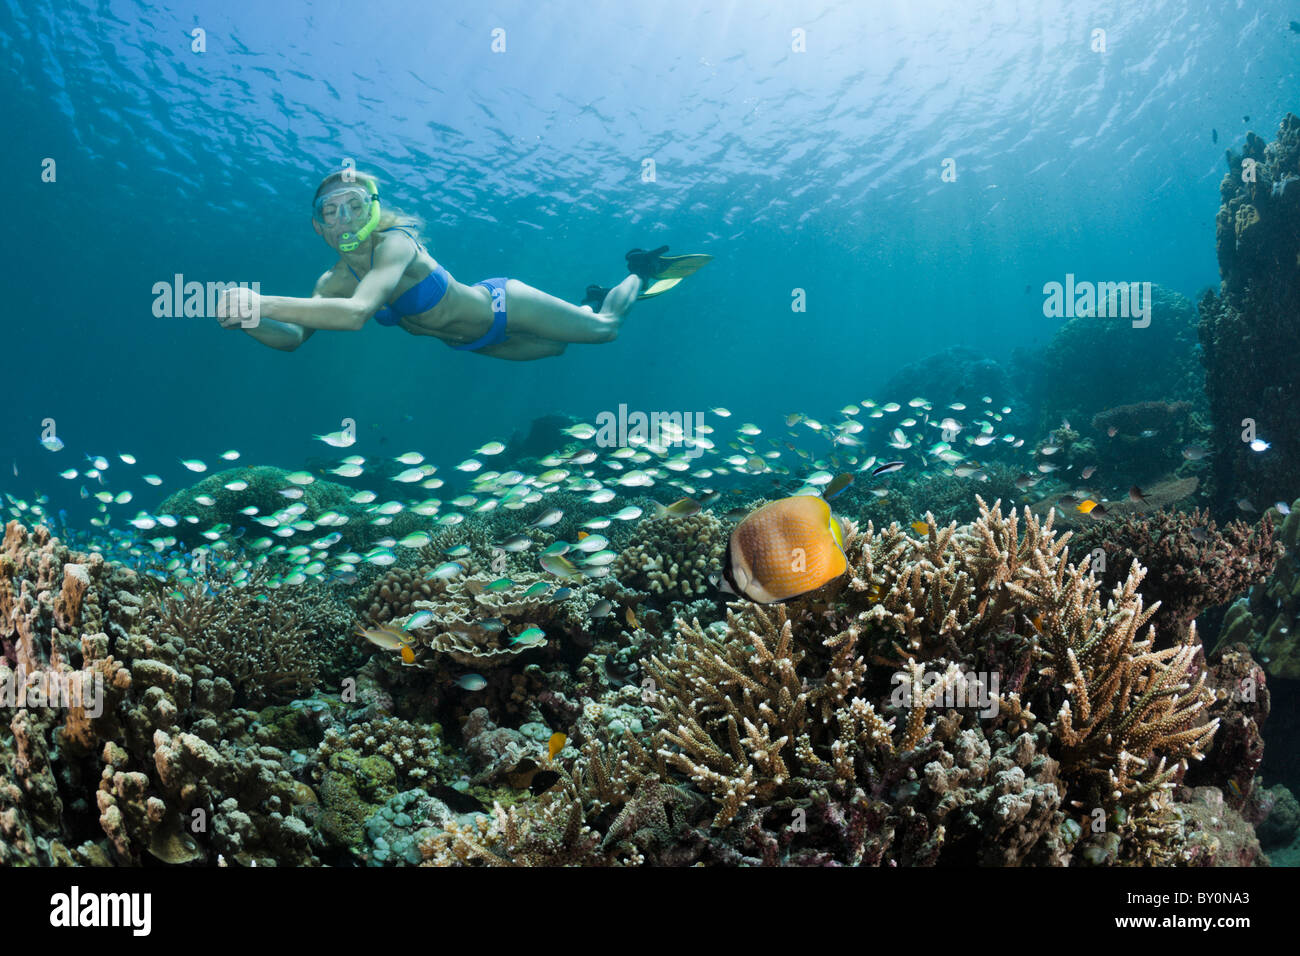 Free diving over Coral Reef, Amed, Bali, Indonesia Stock Photo - Alamy